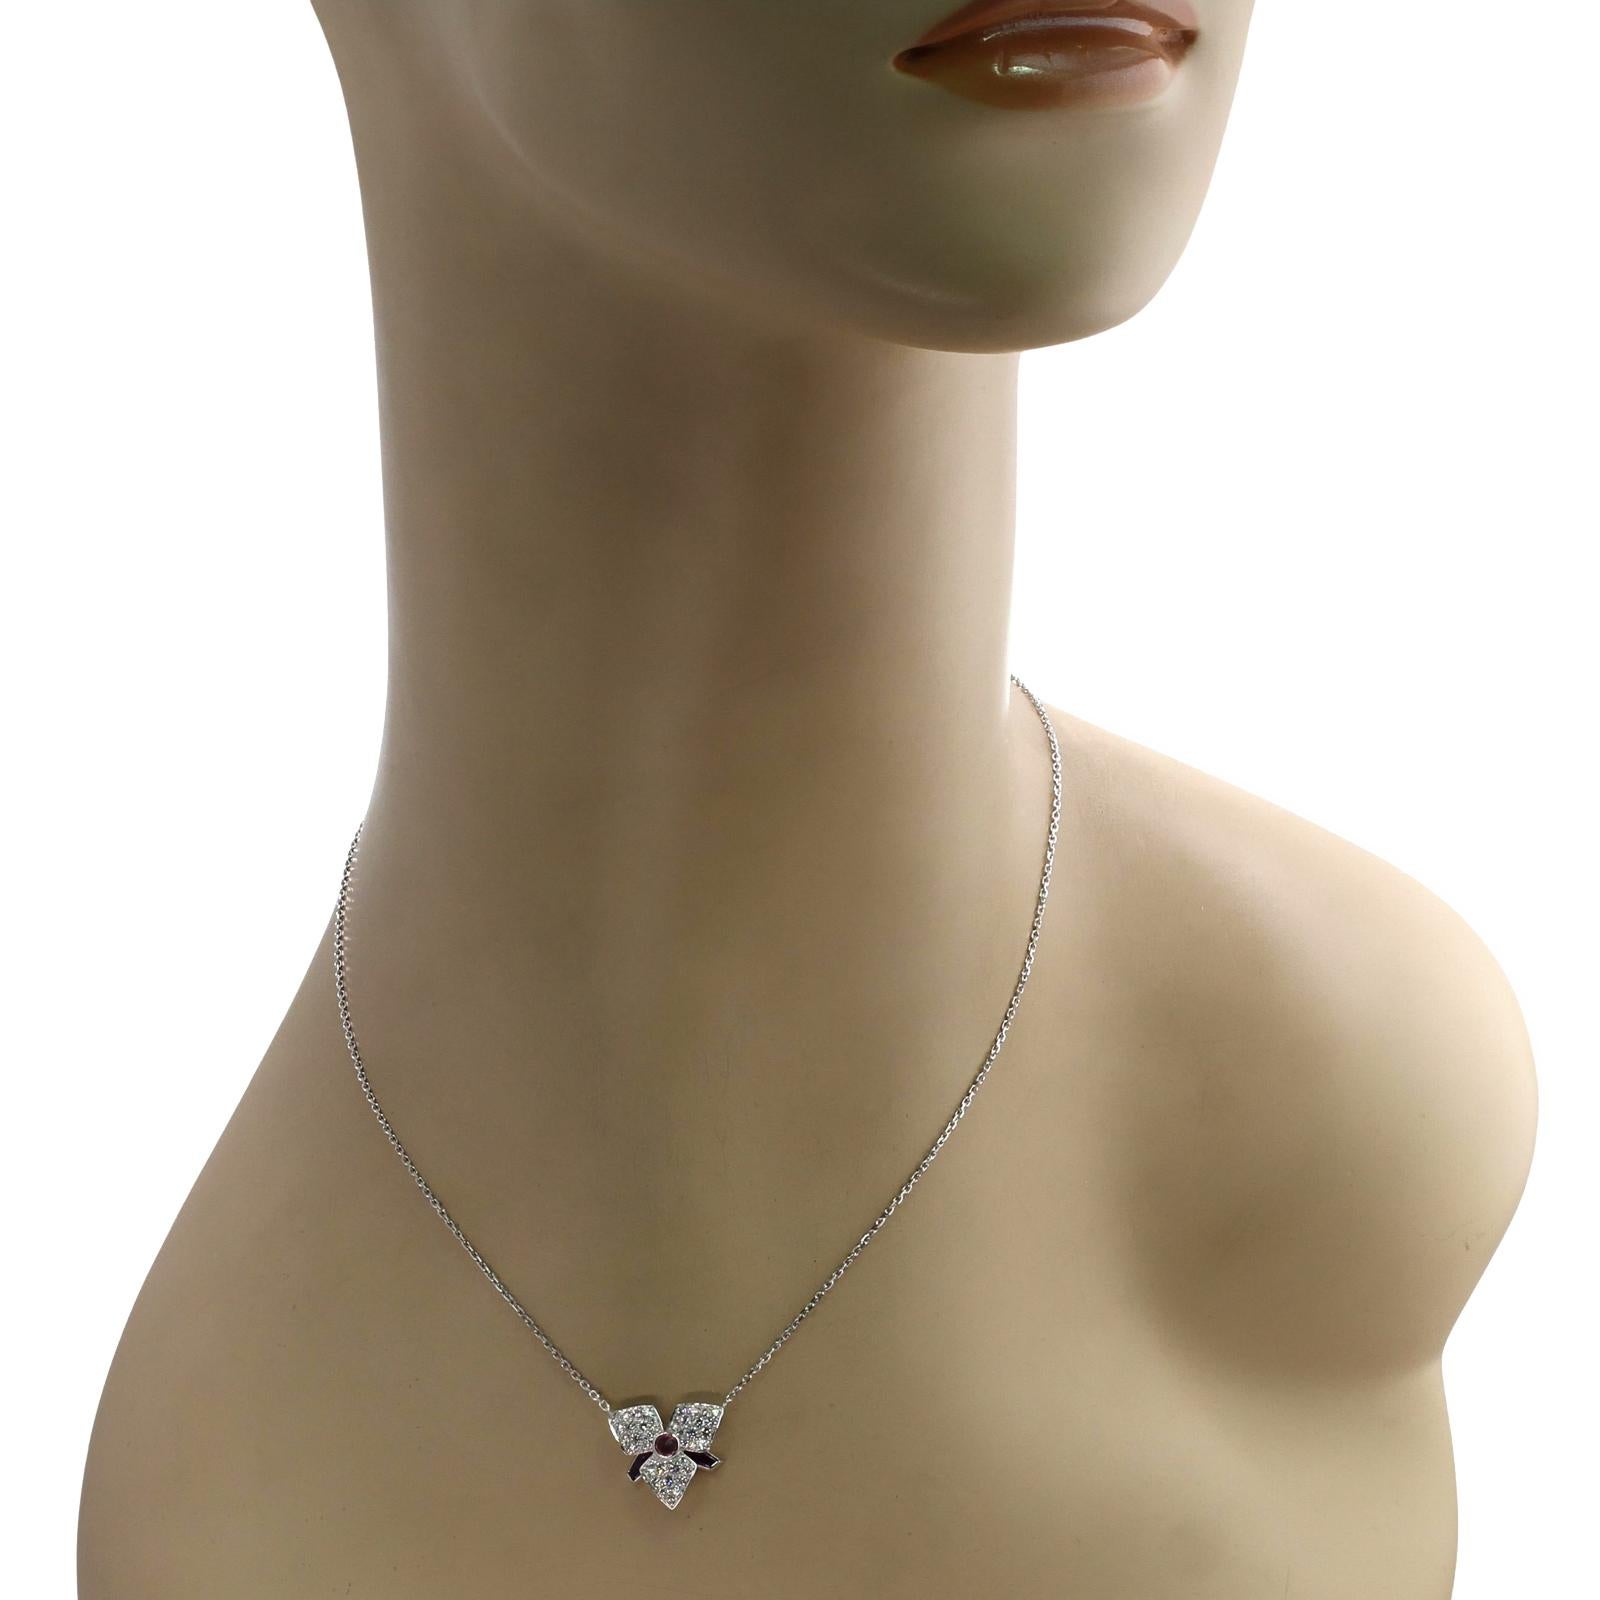 This splendid necklace from the stunning Caresse D'Orchidees collection is crafted in 18k white gold and features a geometric orchid-shaped pendant paved with brilliant-cut E-F-G VVS1-VVS2 diamonds and set with a pair of baguette-cut amethysts and a